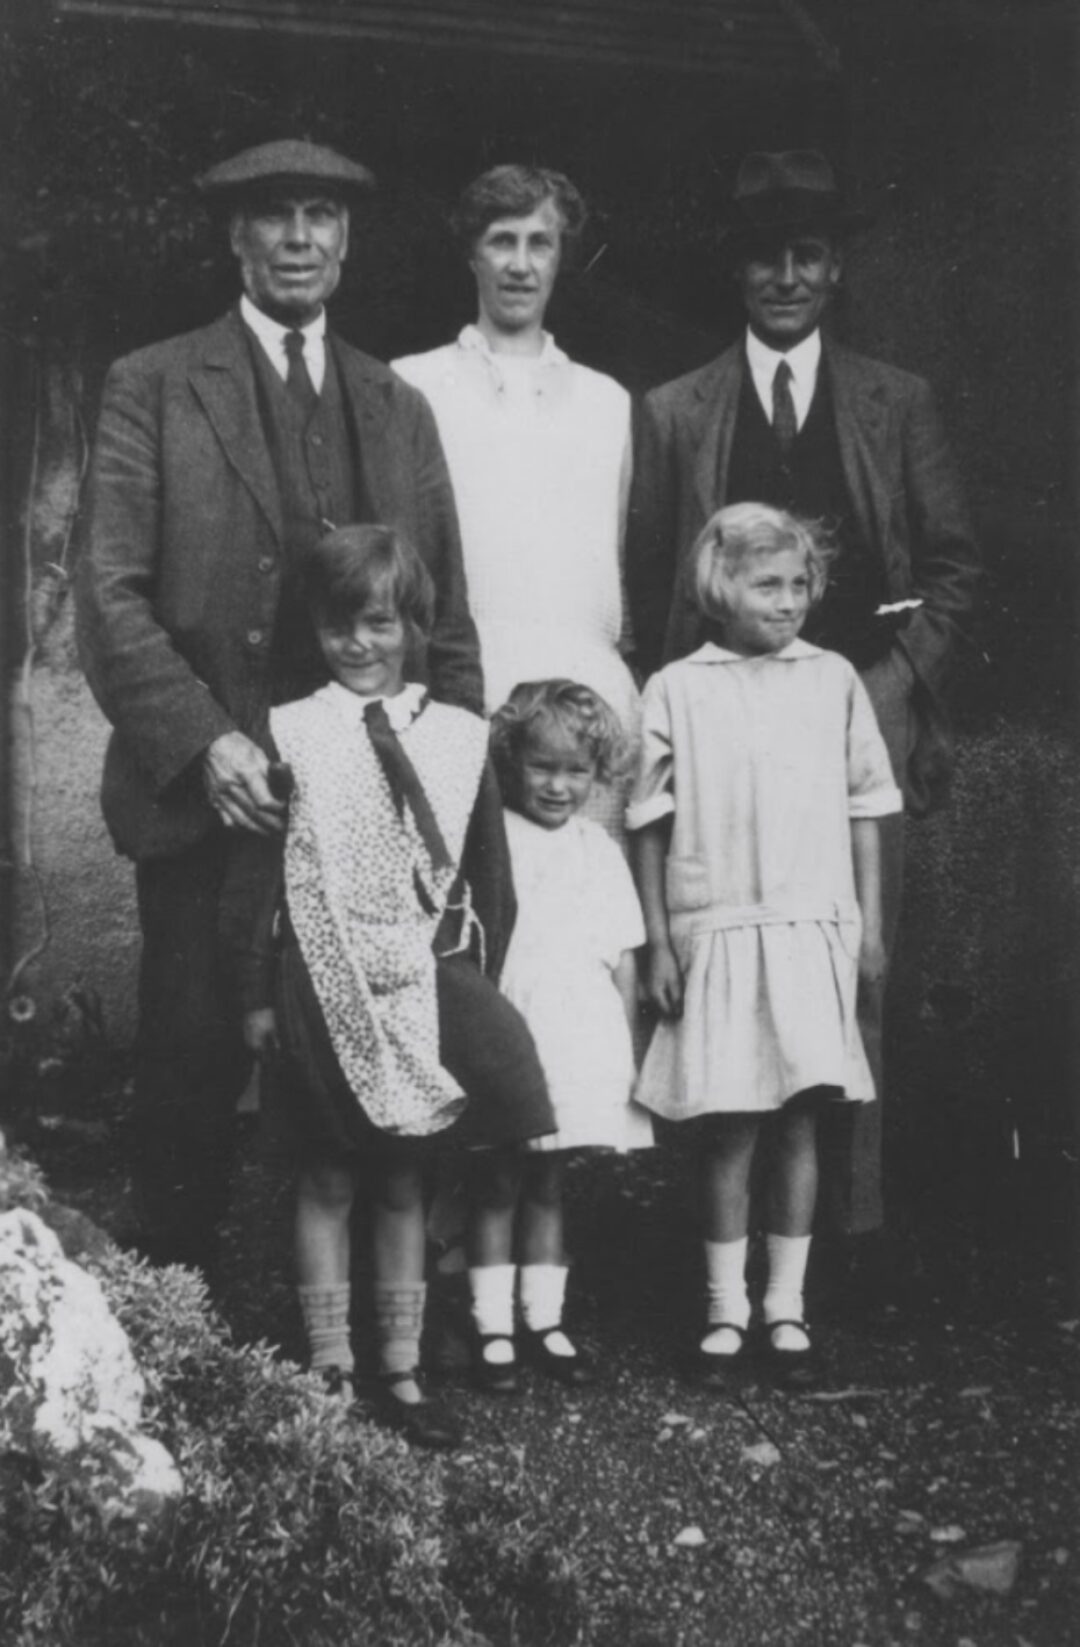 Christabell Bradbury Falconer husband Frank Claude Bradbury standing right with their daughters and Christabells father